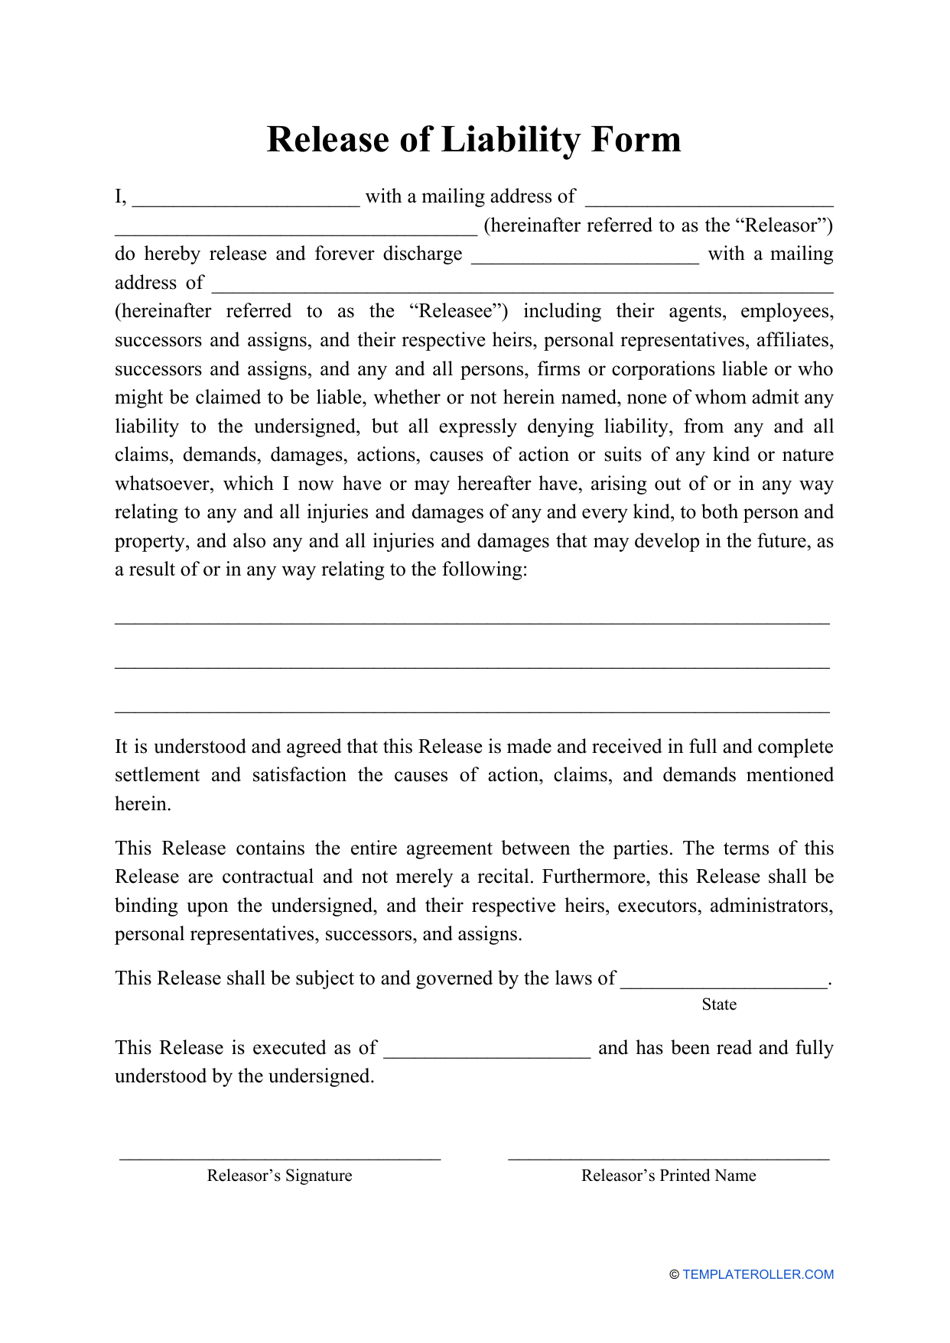 Release of Liability Form, Page 1